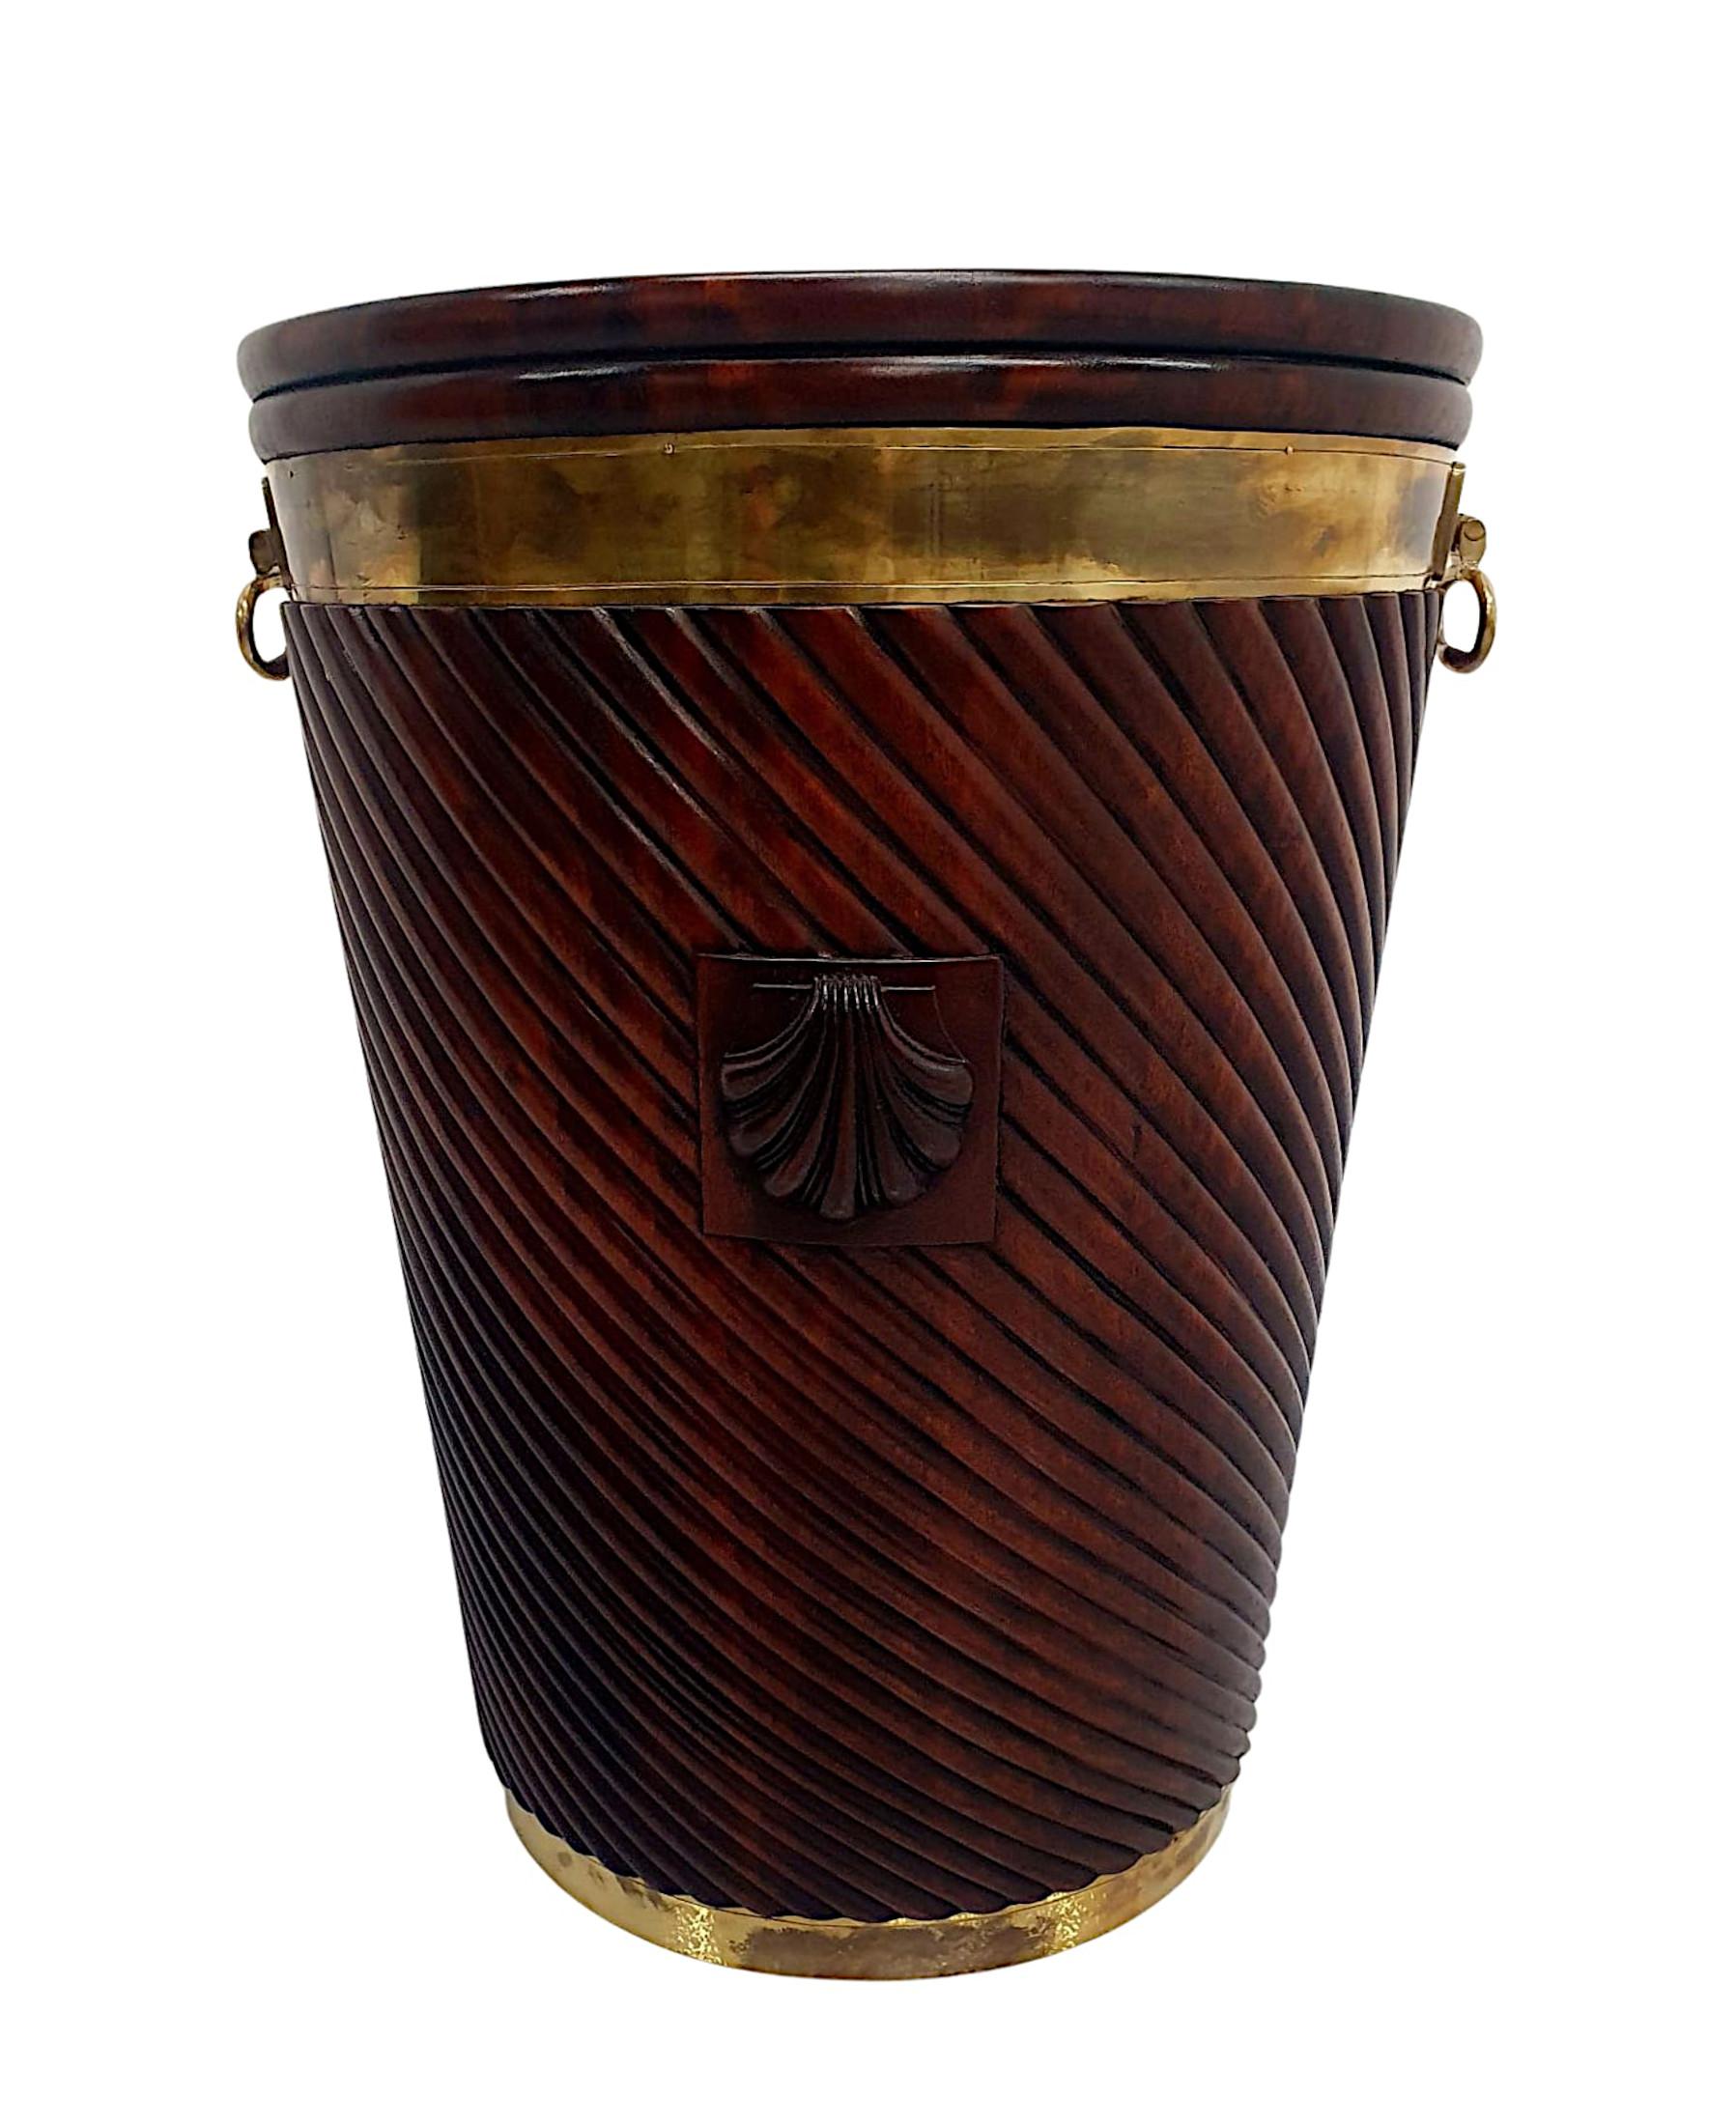 Contemporary A Stunning Hand Carved Irish Design Large Peat Bucket For Sale